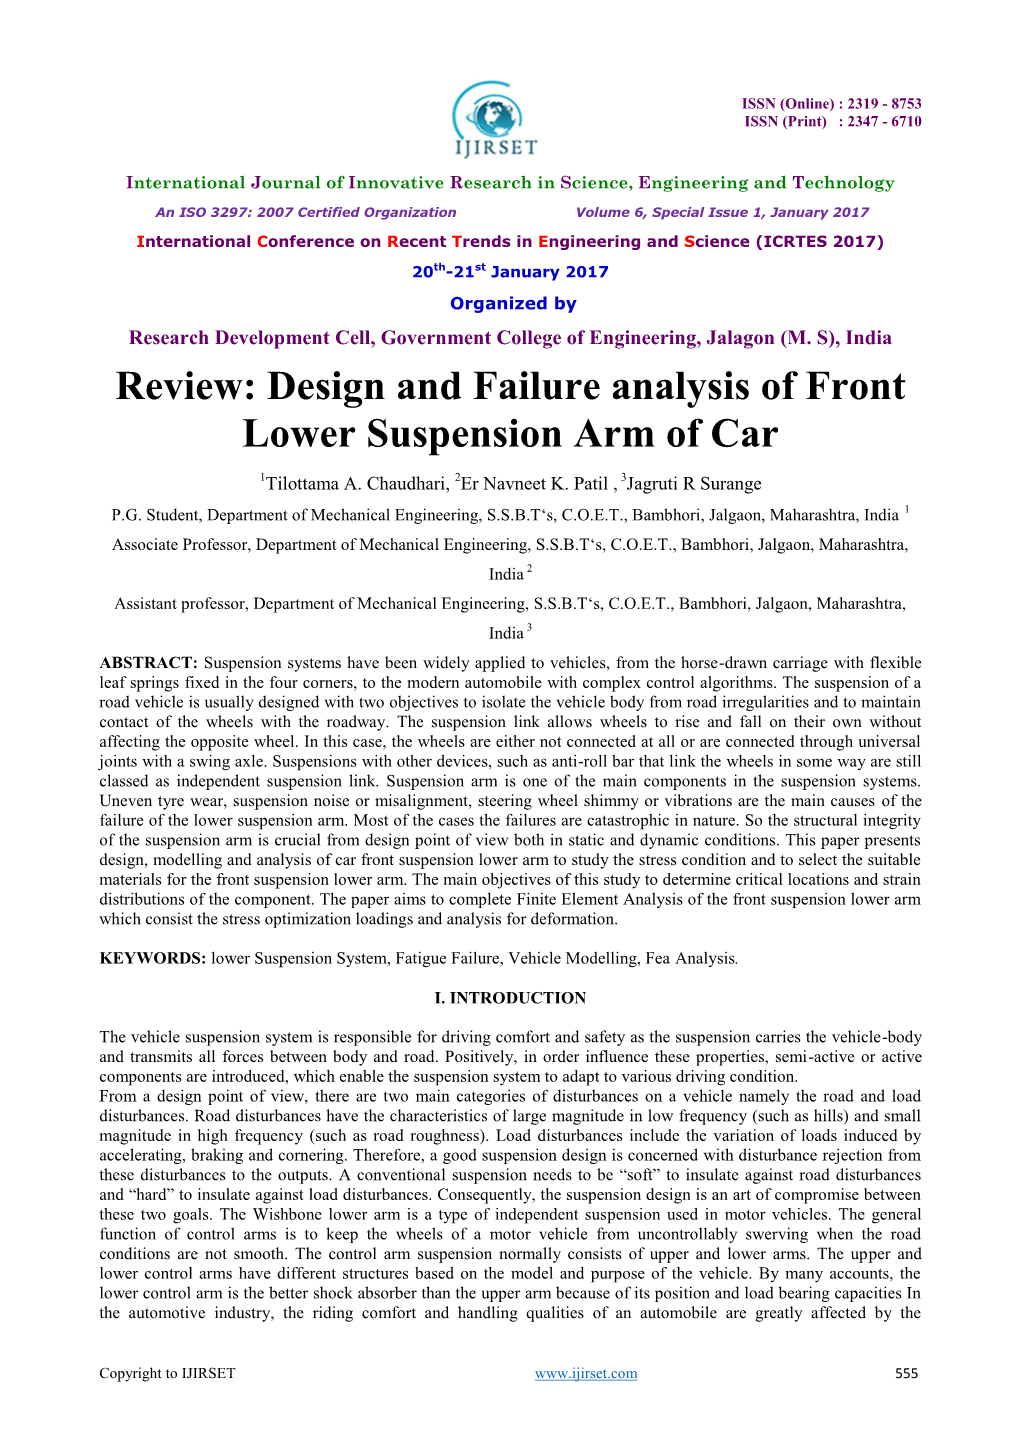 Review: Design and Failure Analysis of Front Lower Suspension Arm of Car